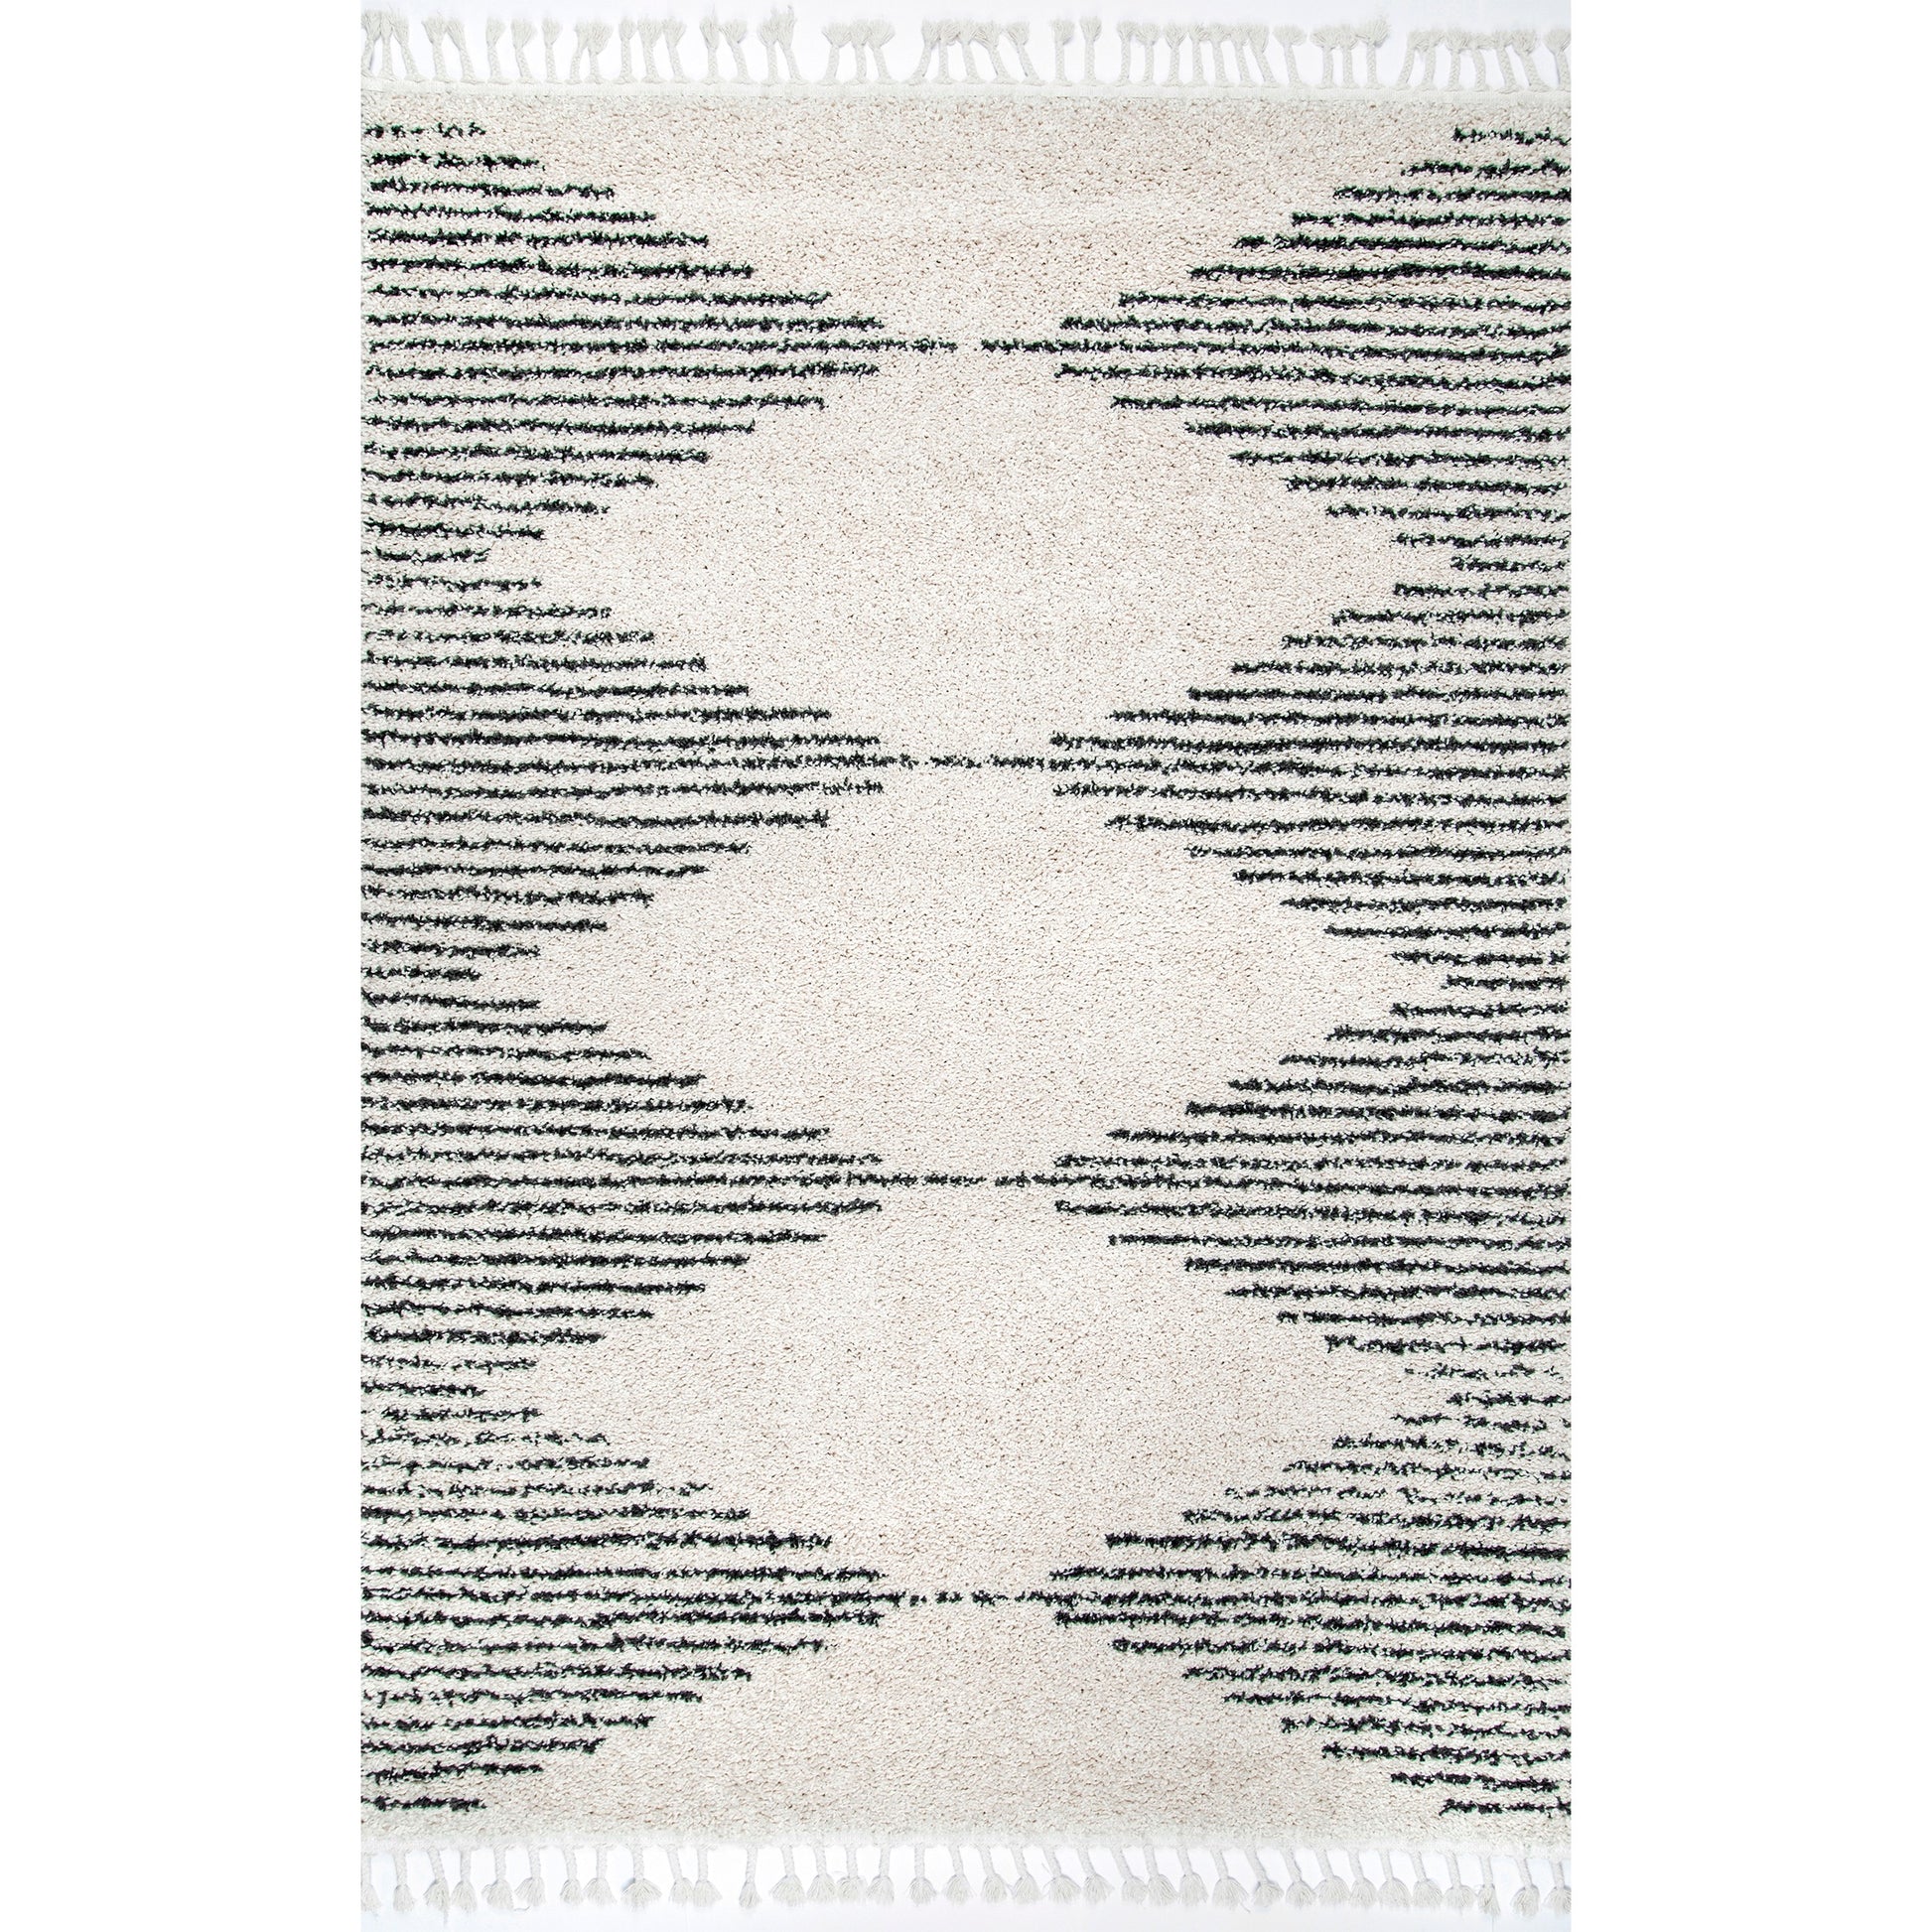 Nuloom Bria Moroccan Nbr1843D Off White Area Rug